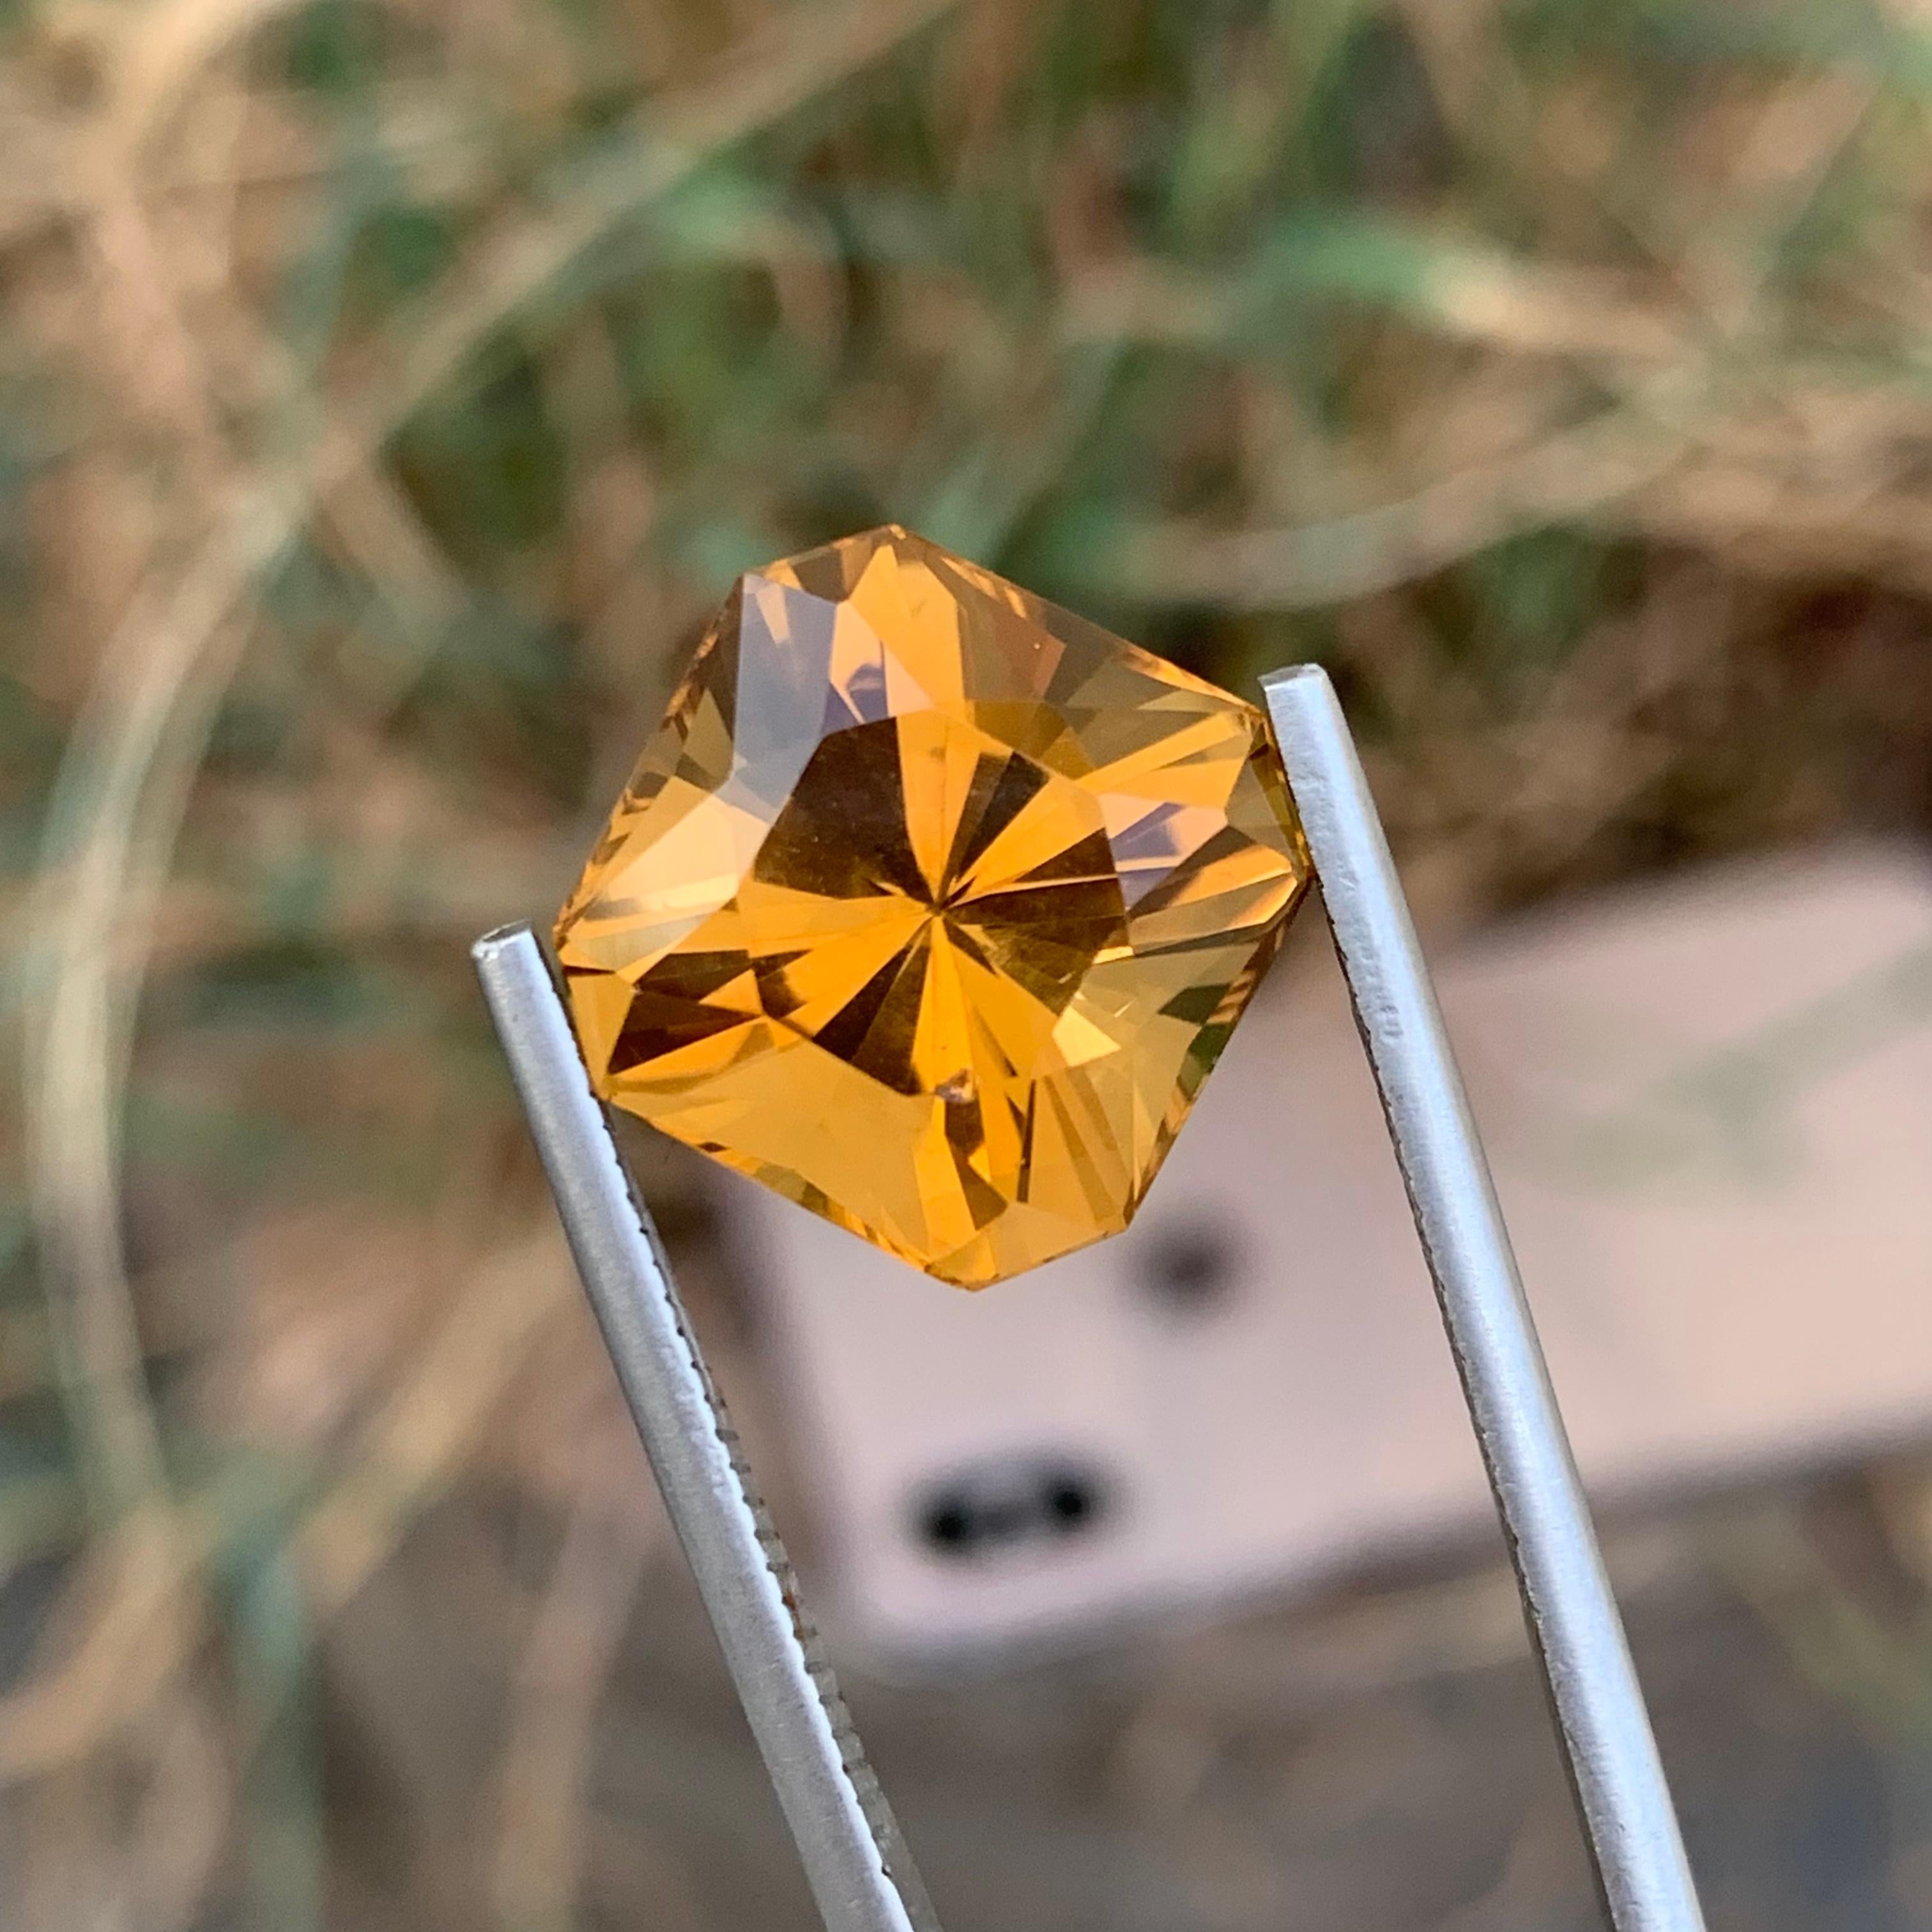 10.60 Carats Natural Loose Fancy Cut Citrine Gemstone From Brazil Mine For Sale 3